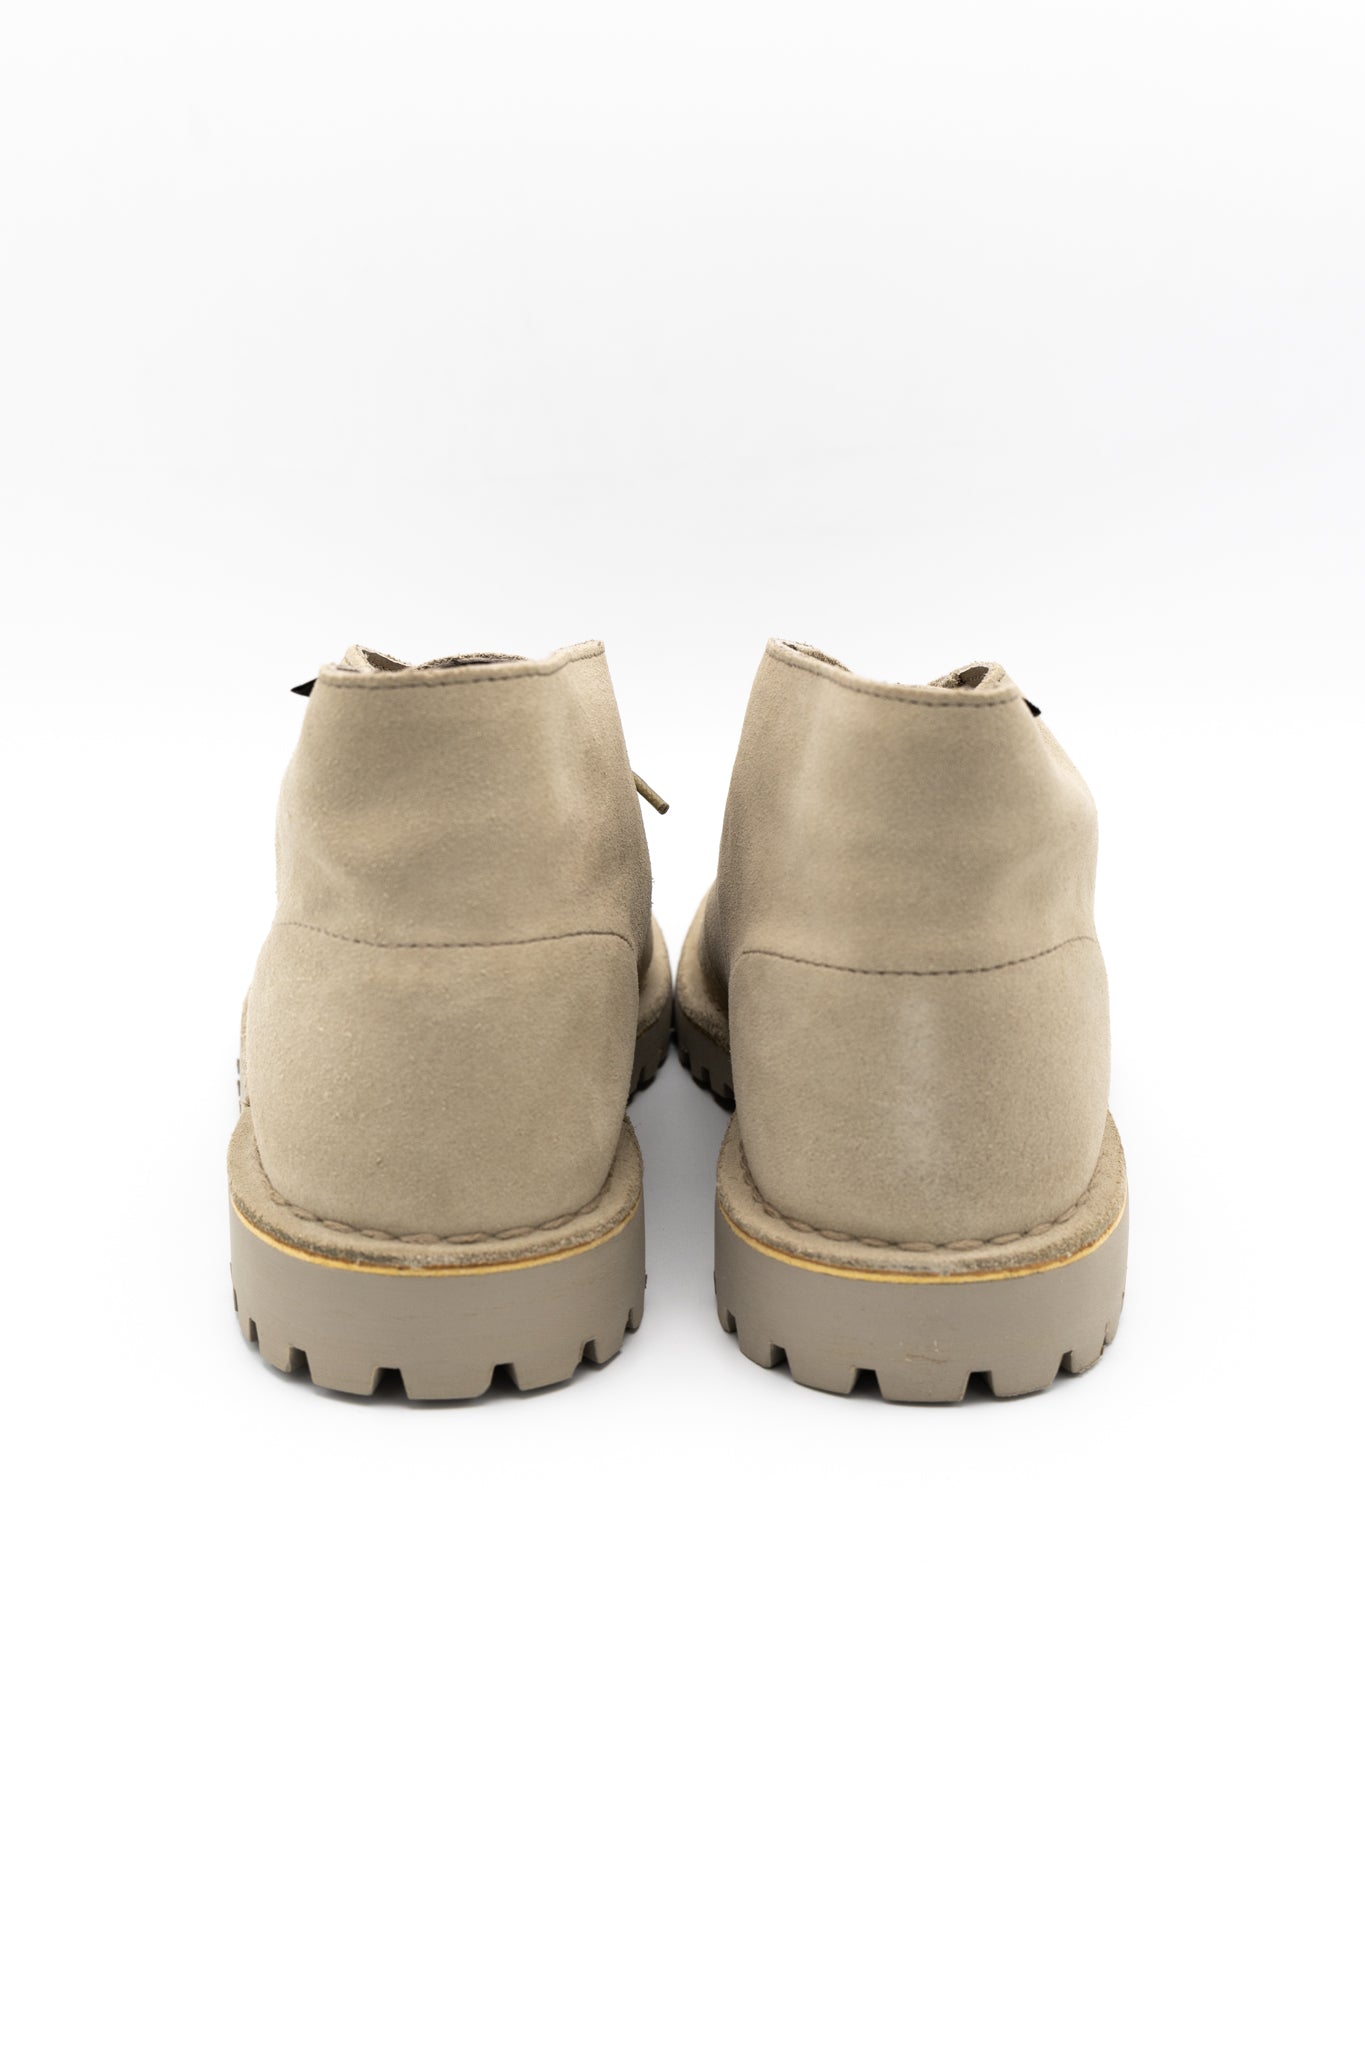 Clarks Originals collaboration with BEAMS. Color: Sand. Suede upper "GORE-TEX (R)" with excellent waterproof and moisture permeability for the upper. Rubber sole. Elastic gore inside the shoes that allows them to be worn as a slip on without a shoelace